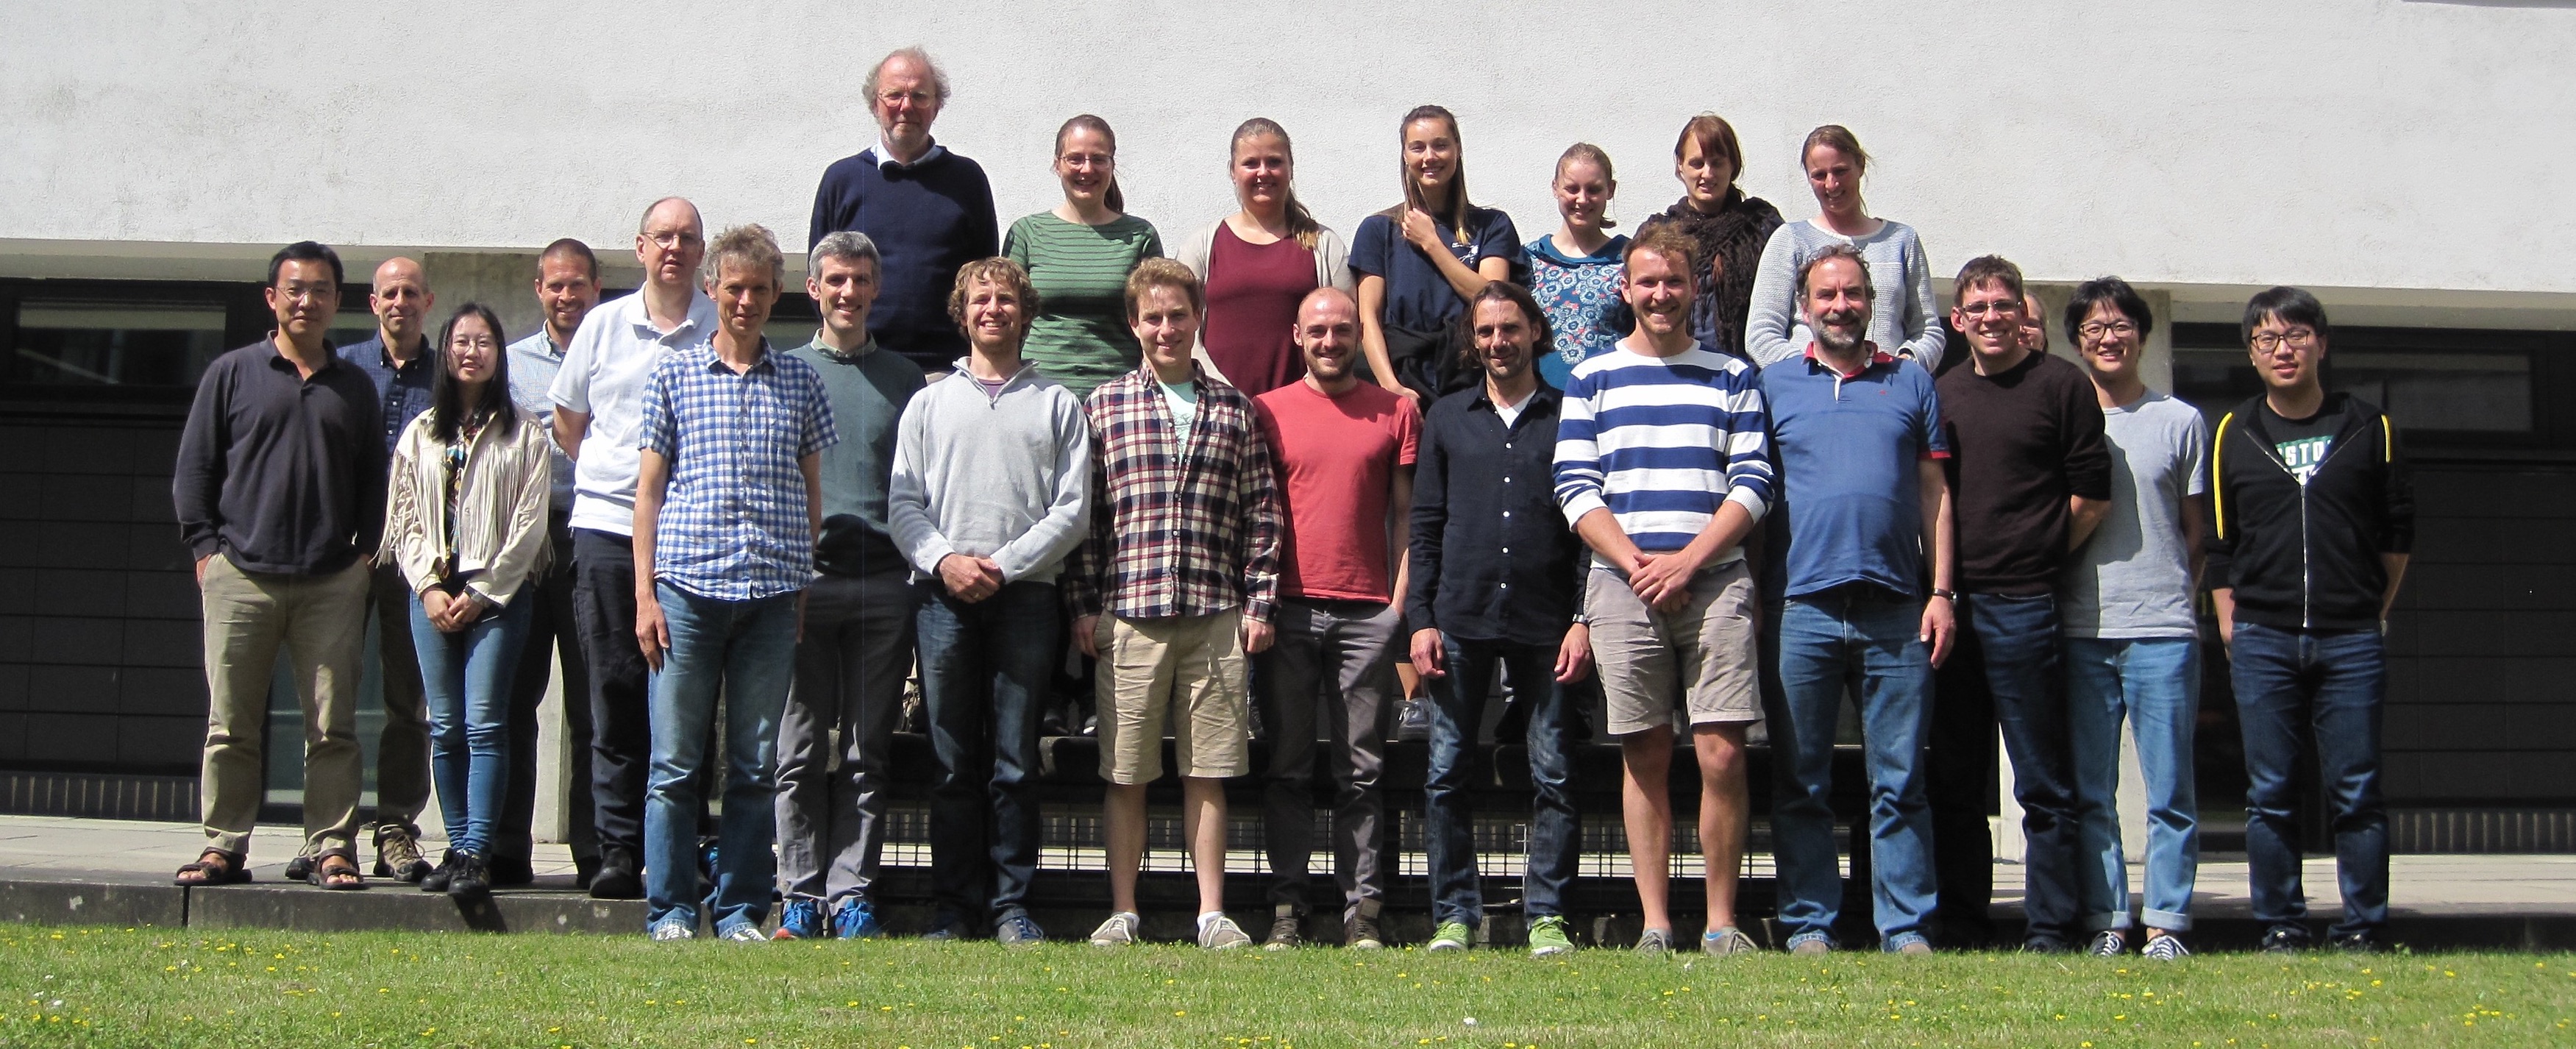 Participants from the 2019 IGP meeting at the University of East Anglia